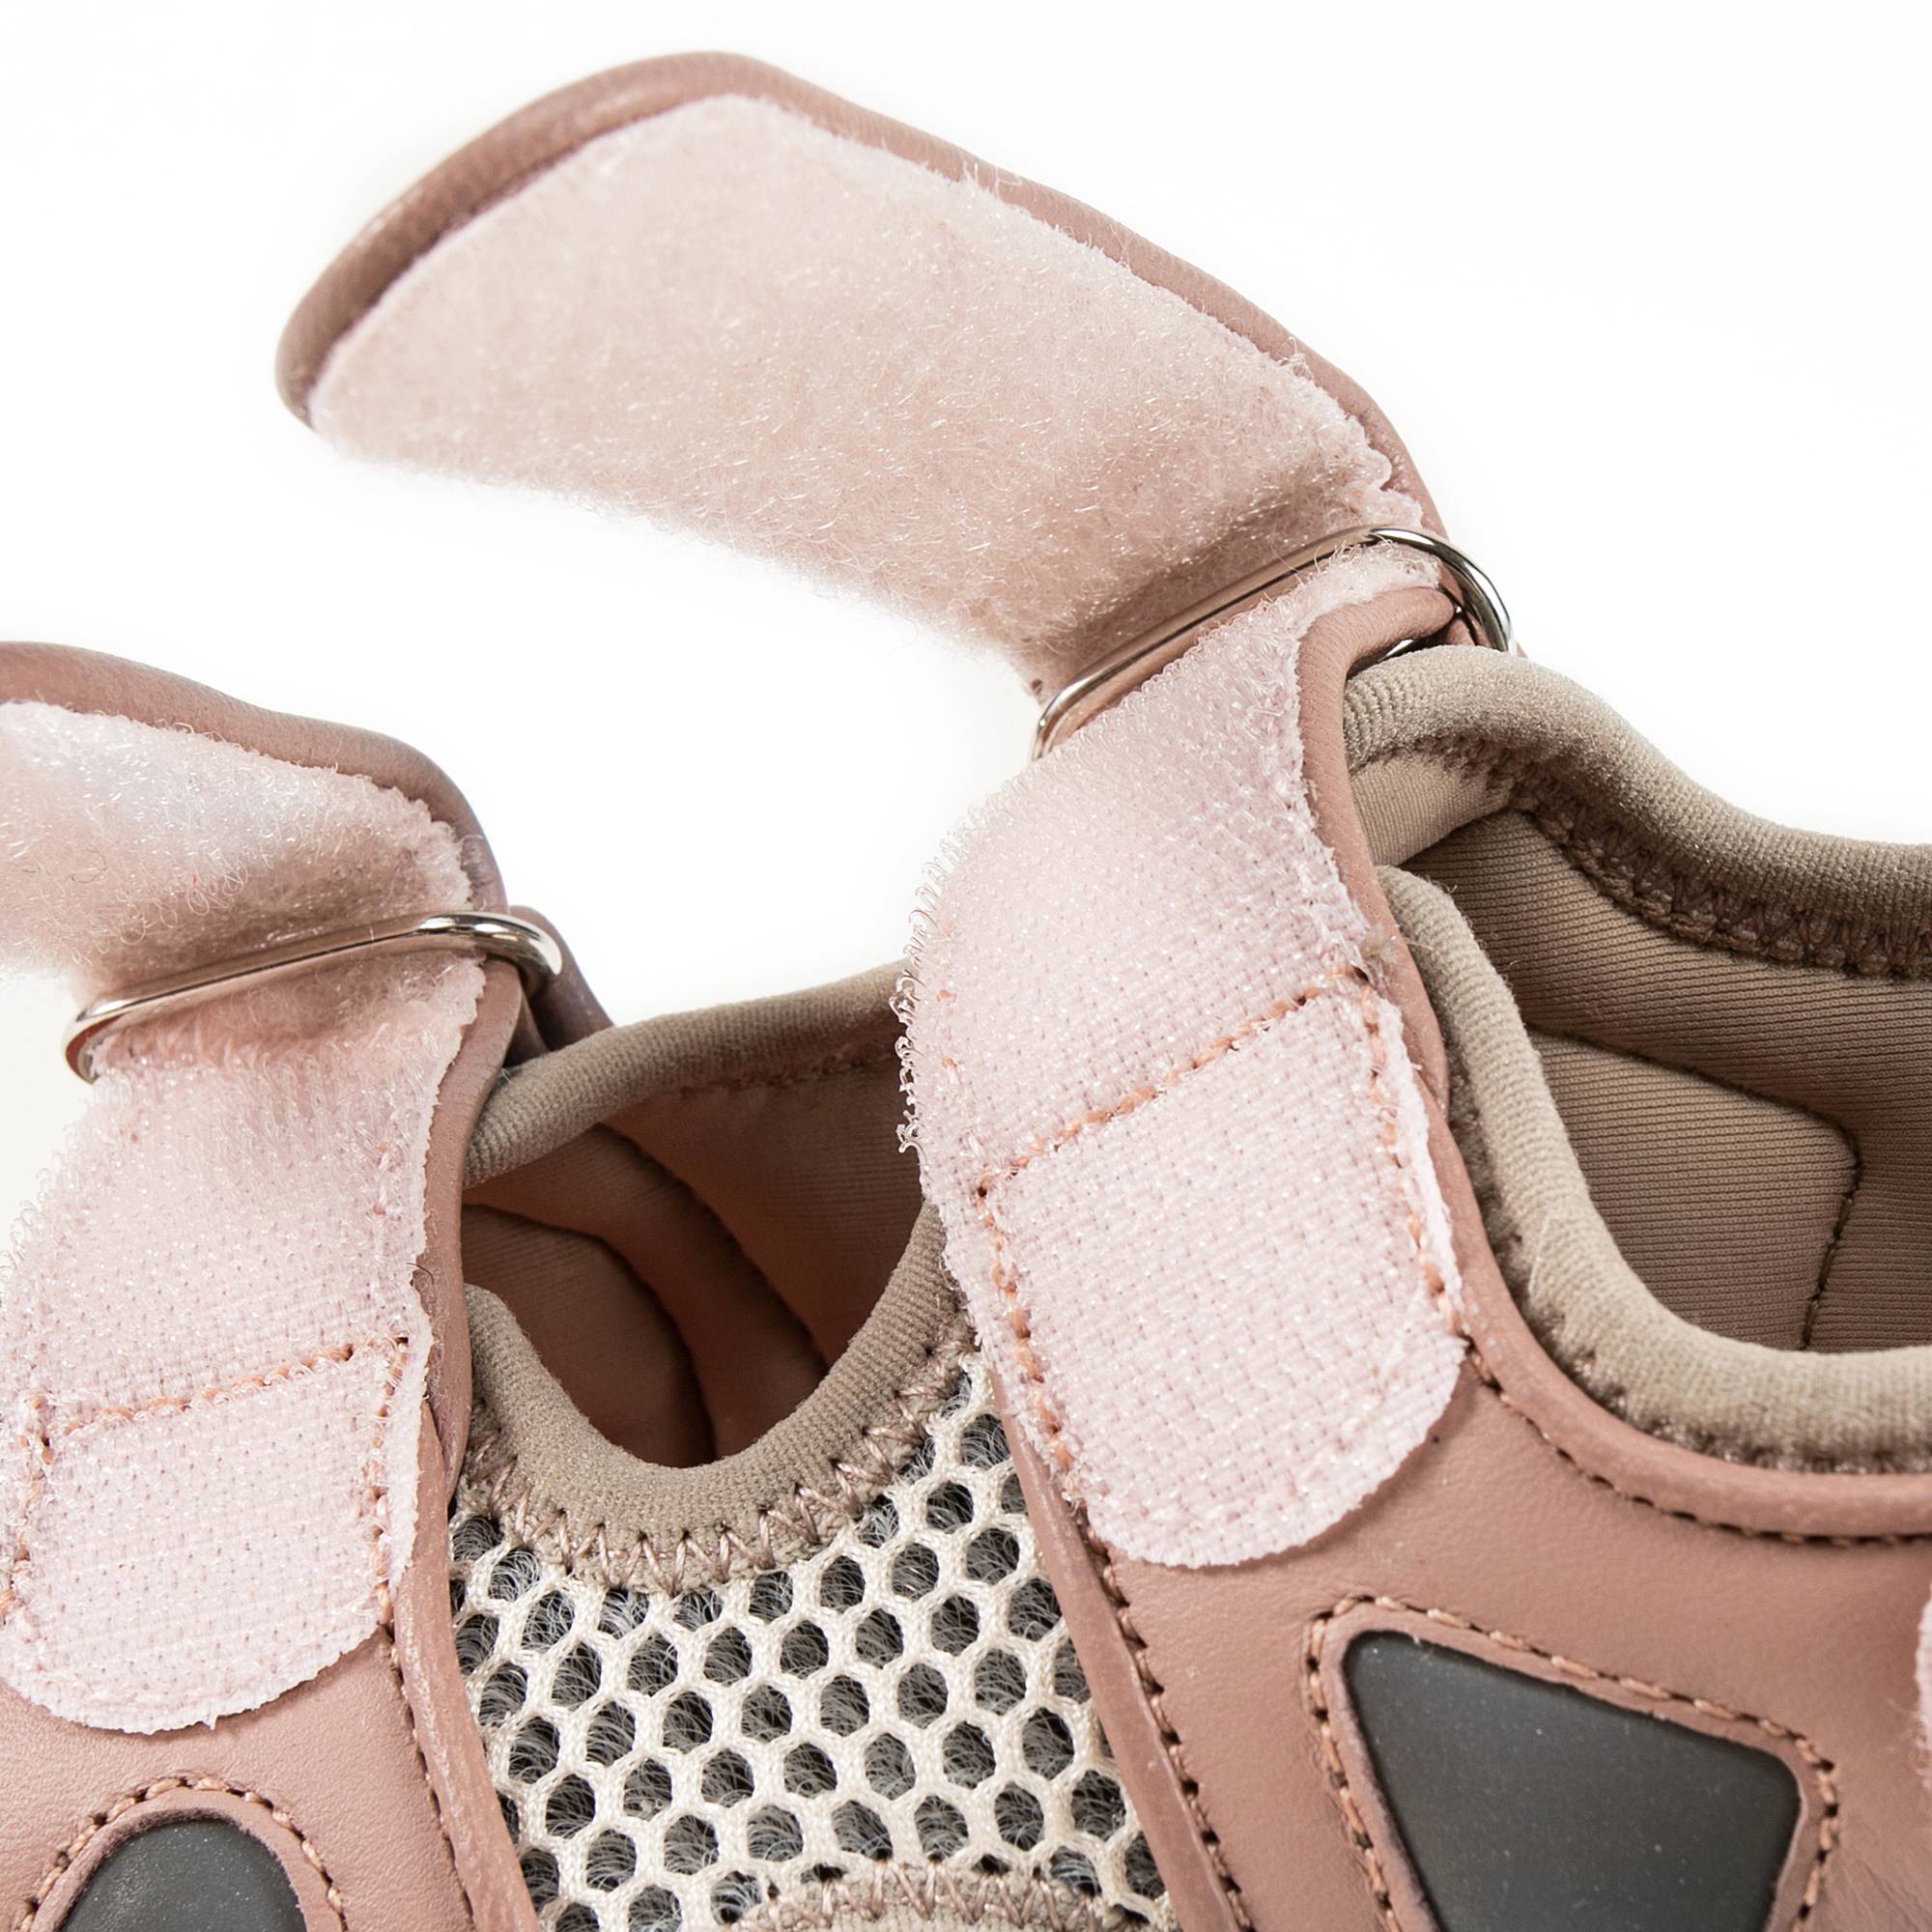 Girls Pink Logo Leather Shoes